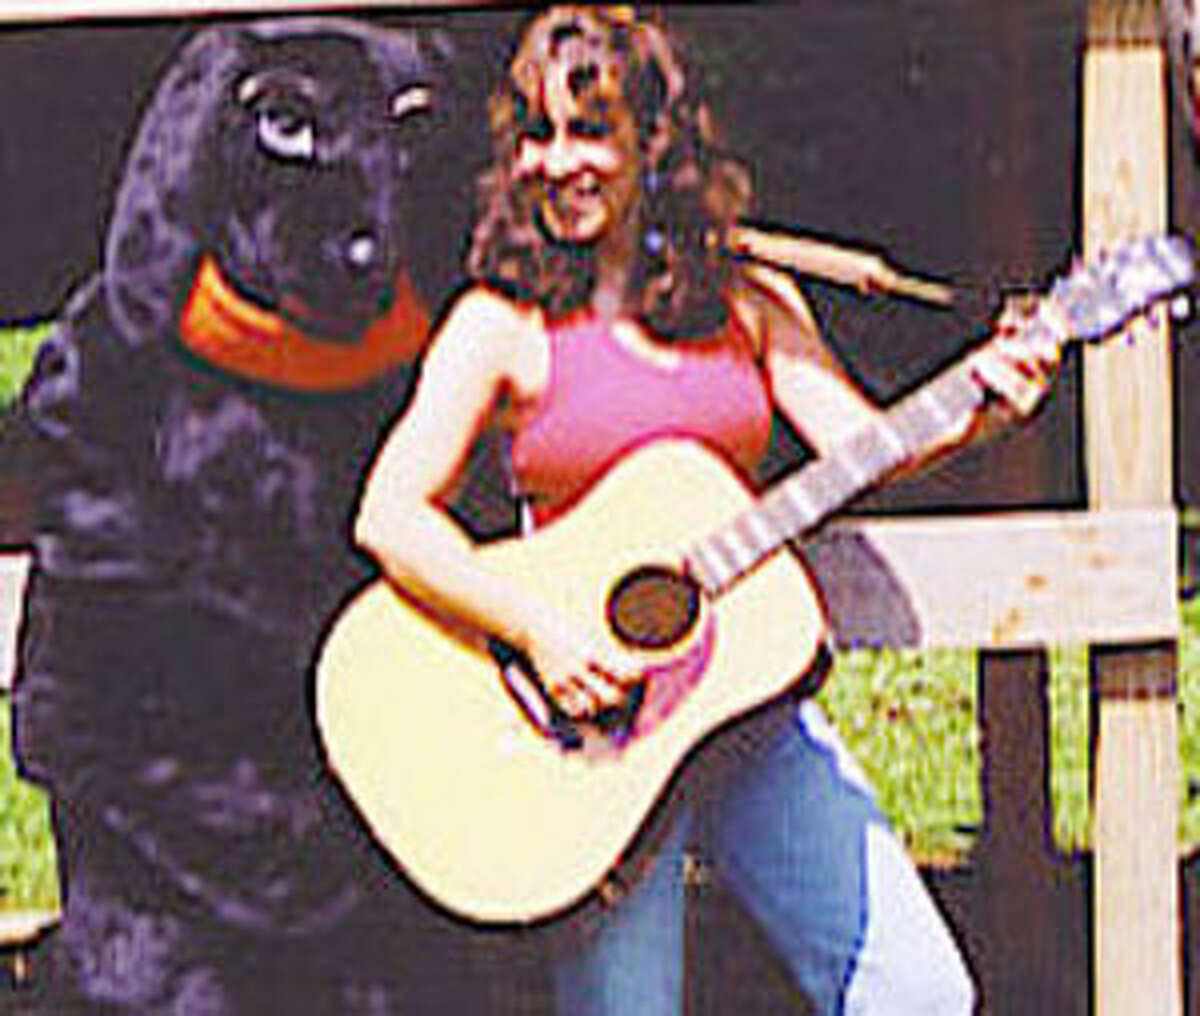 Lynn Lewis and Friends (Photo from LynnLewisAndFriends.com)